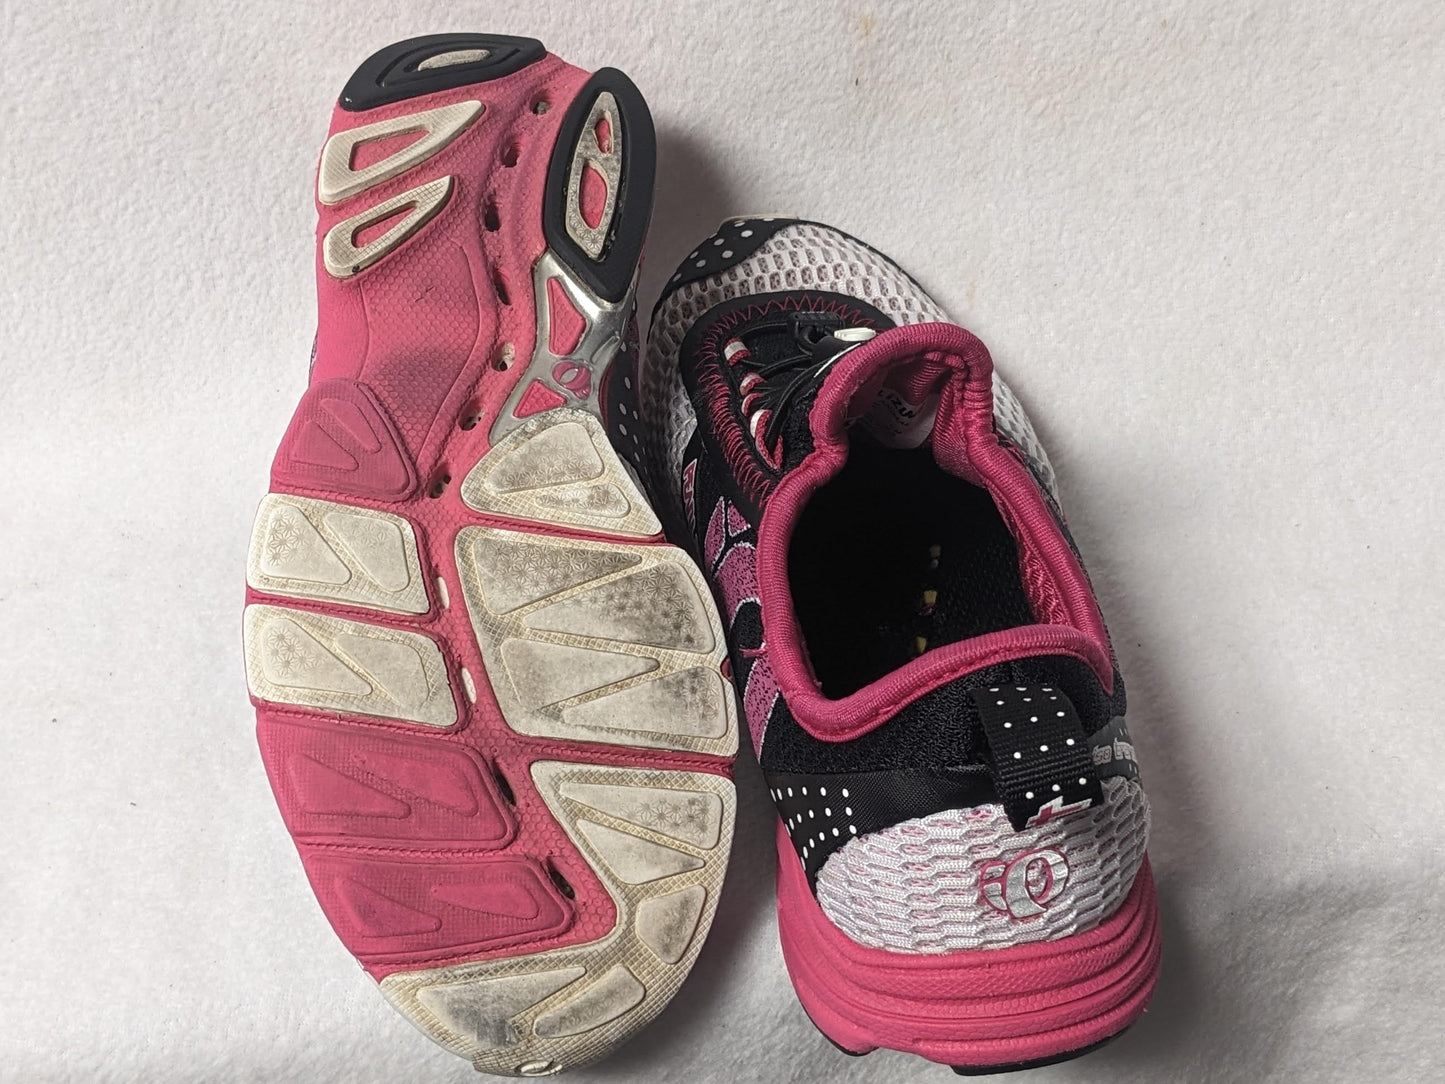 Pearl Izumi Women's Athletic Shoes Size Women 6.5 Color Pink Condition Used